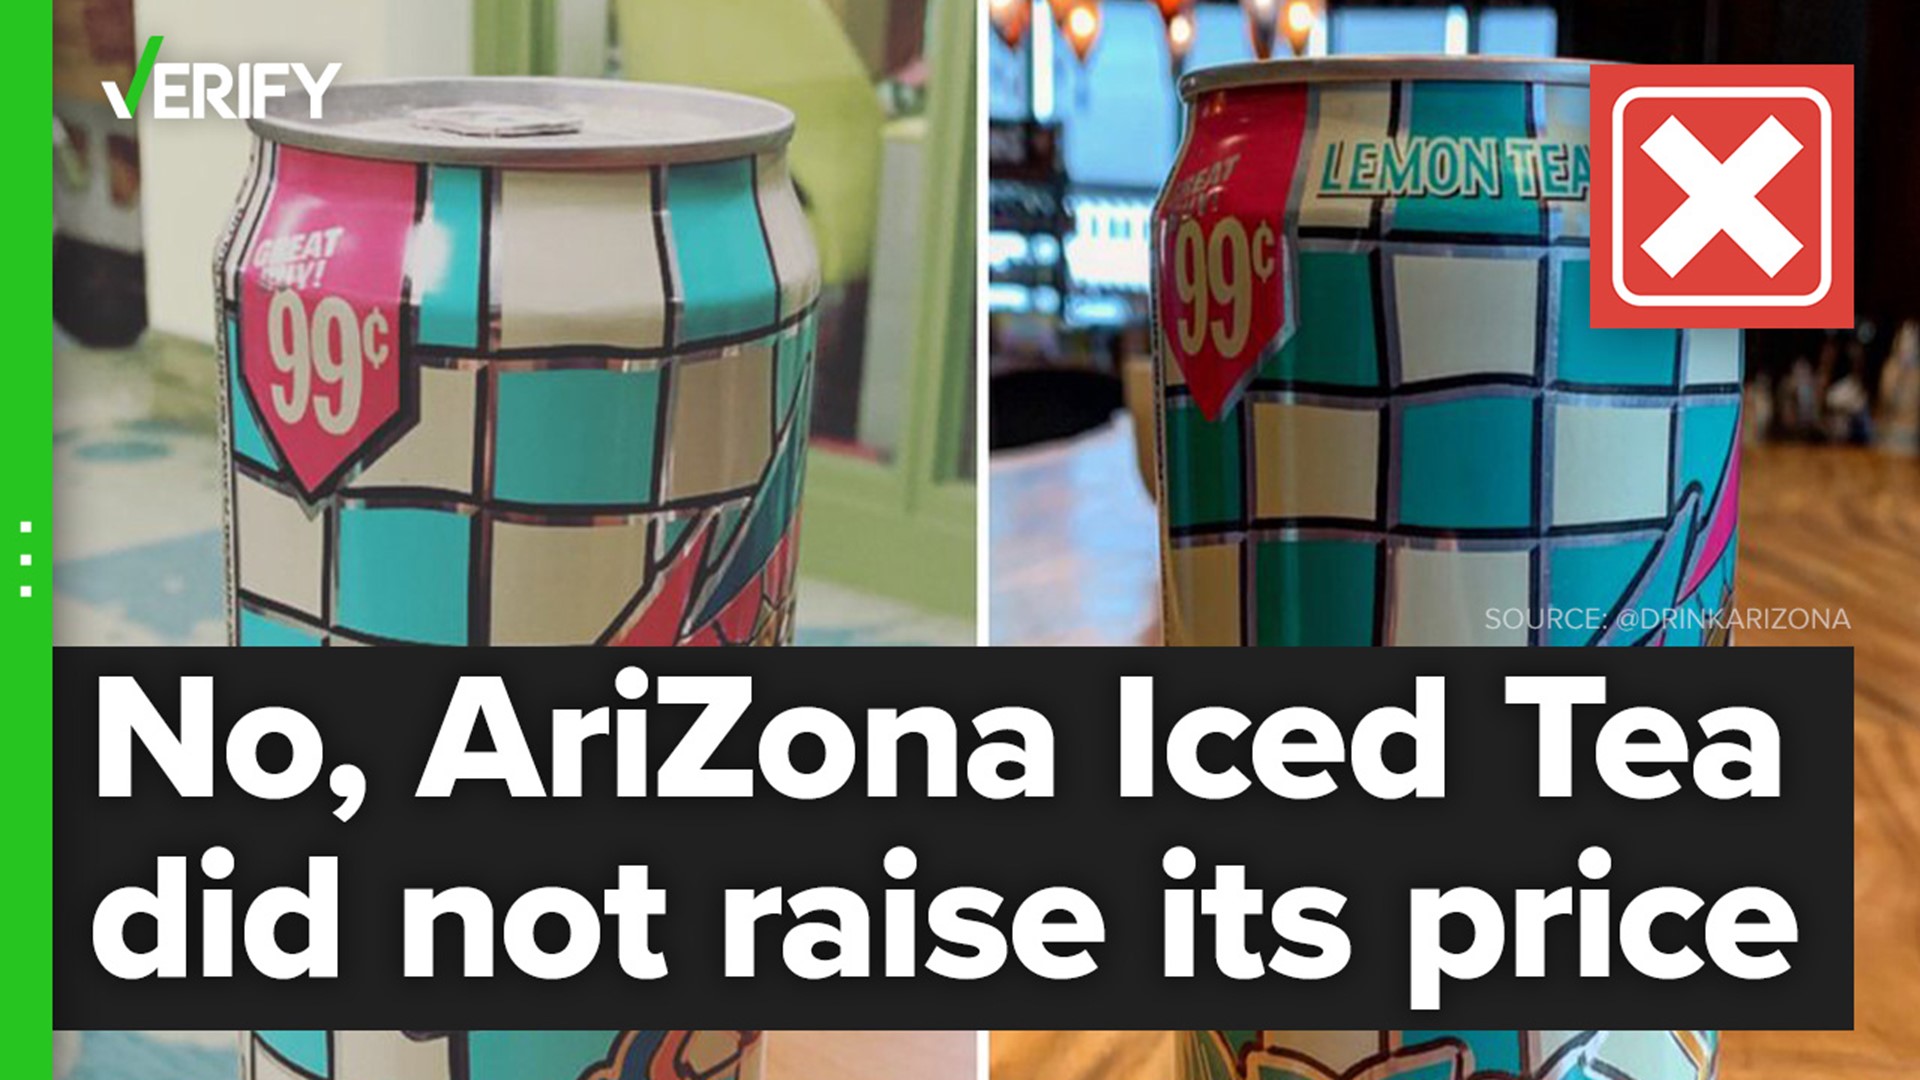 The price of a 23-ounce can of AriZona Iced Tea hasn’t changed. The cans are sold for $1.29 in Canadian dollars, which is equivalent to 99 cents in the U.S.